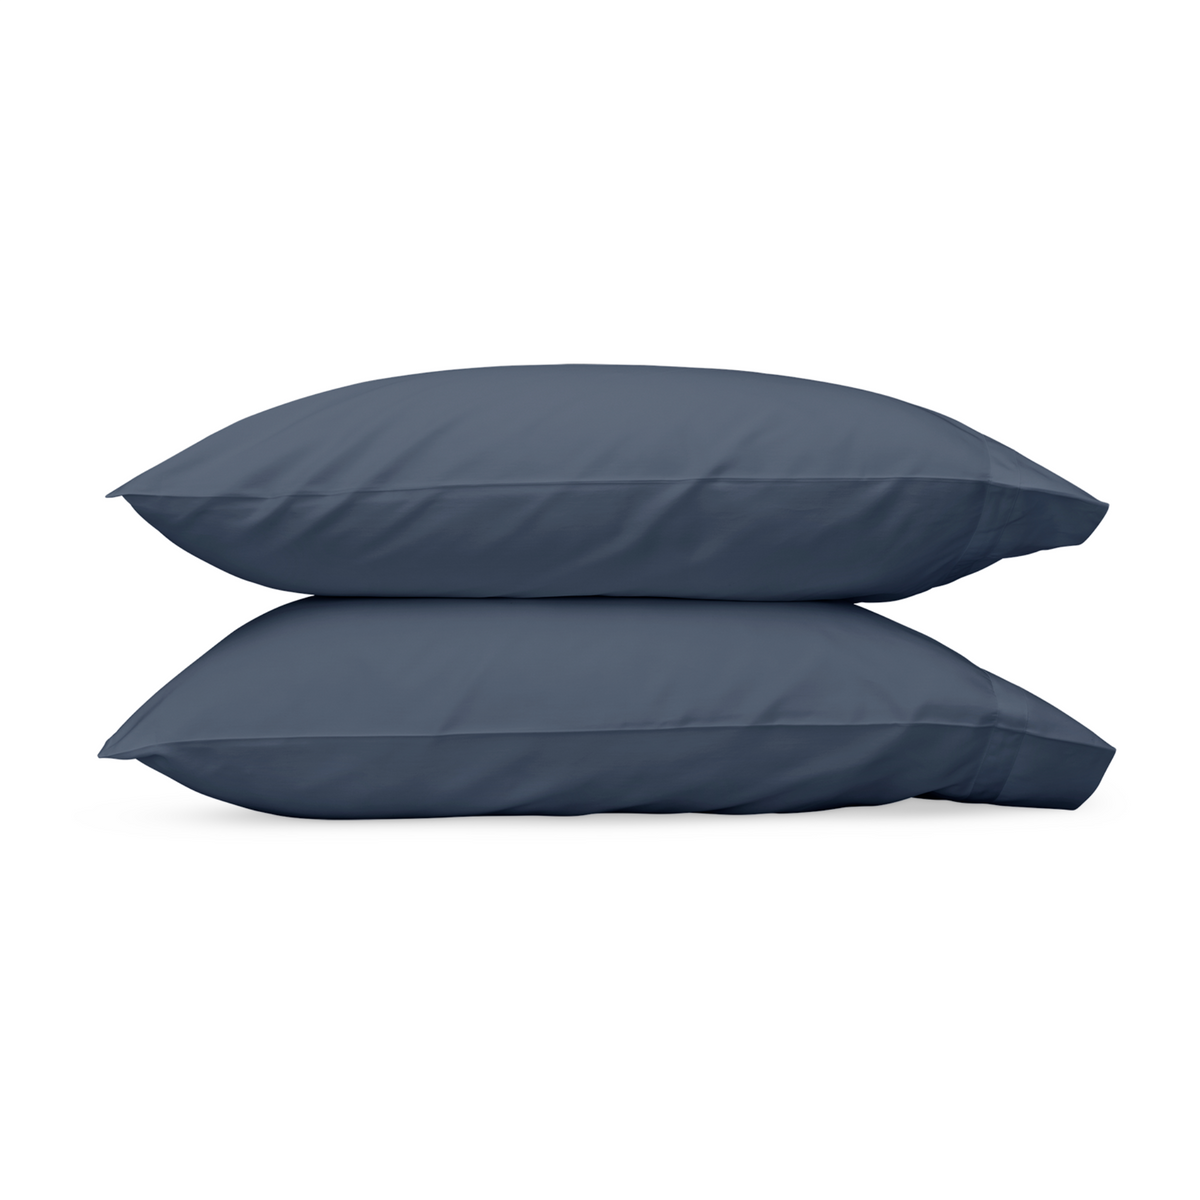 Pair of Pillowcases of Matouk Nocturne Bedding in Steel Blue Color